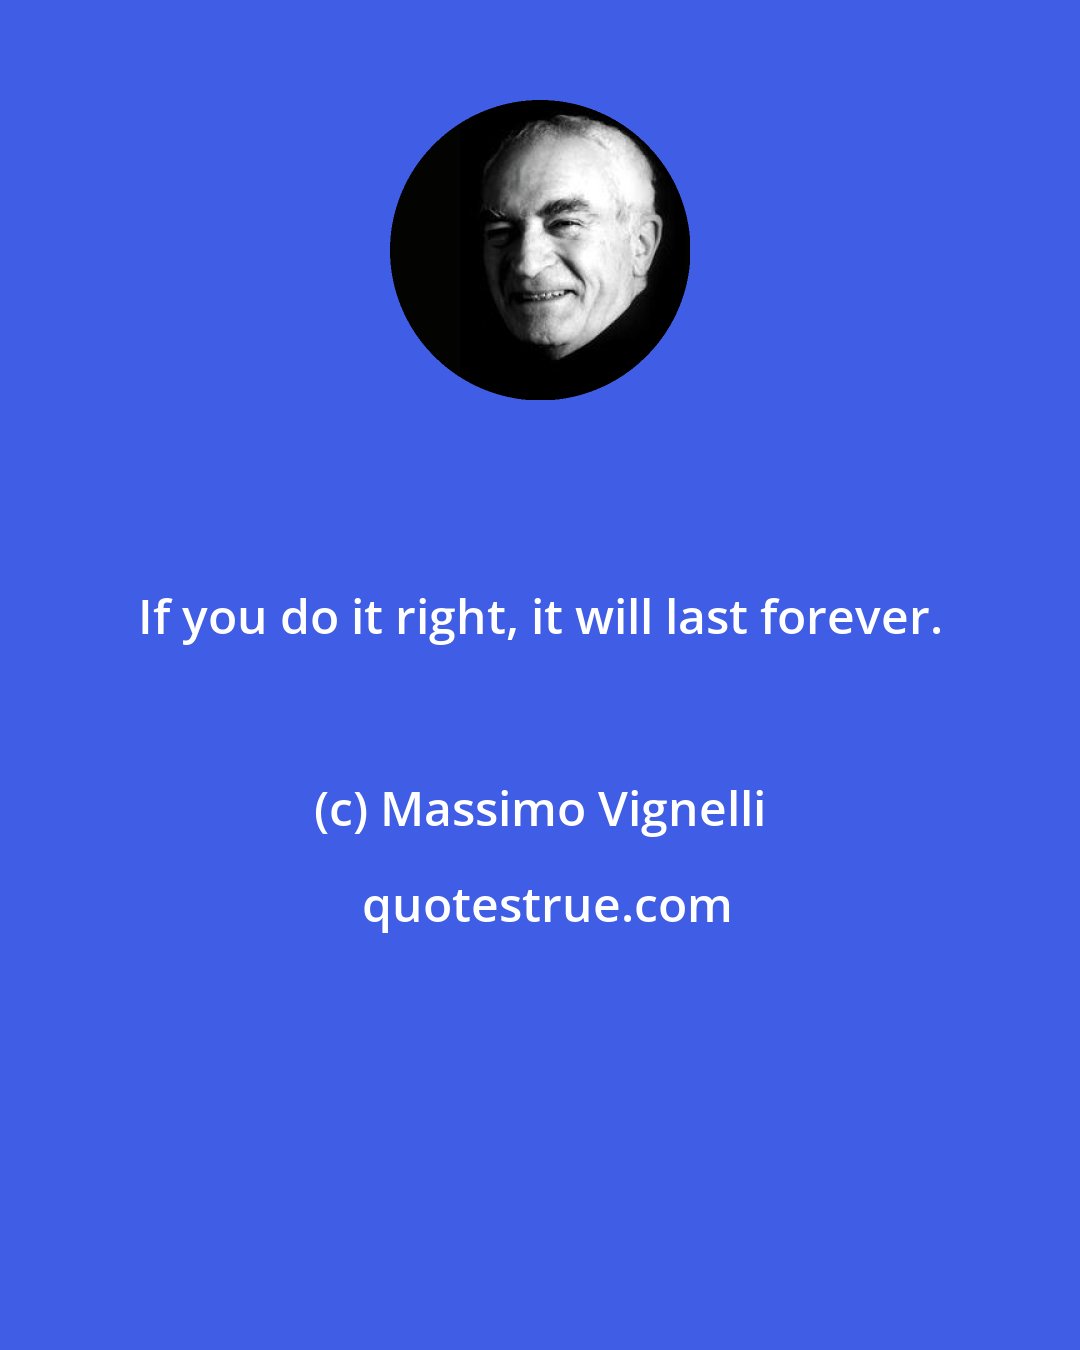 Massimo Vignelli: If you do it right, it will last forever.